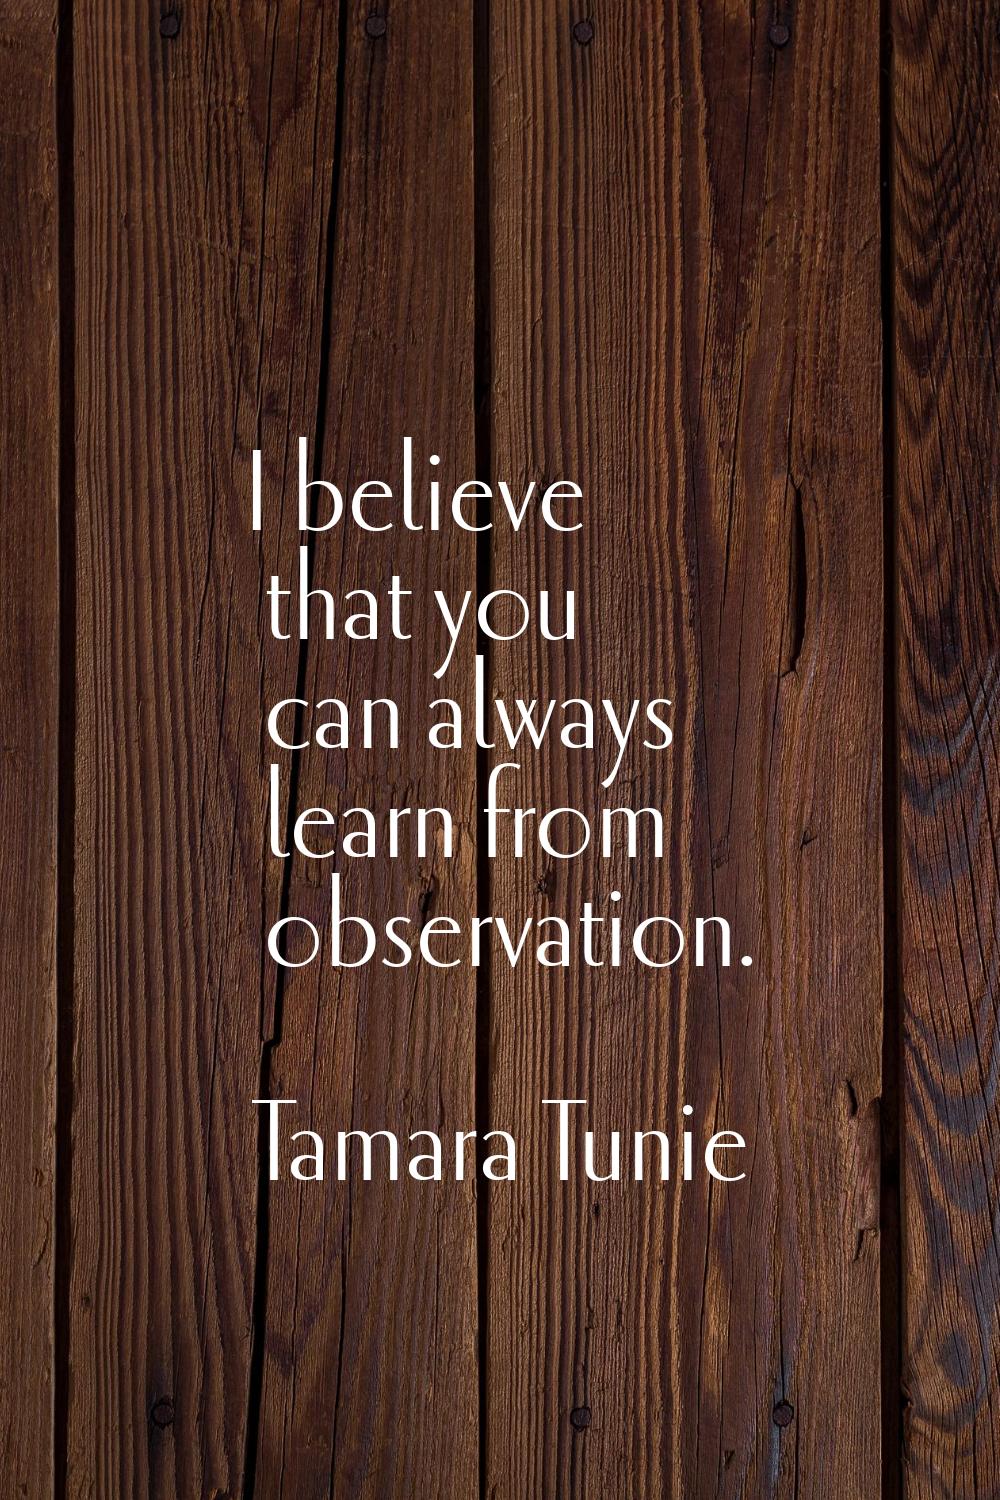 I believe that you can always learn from observation.